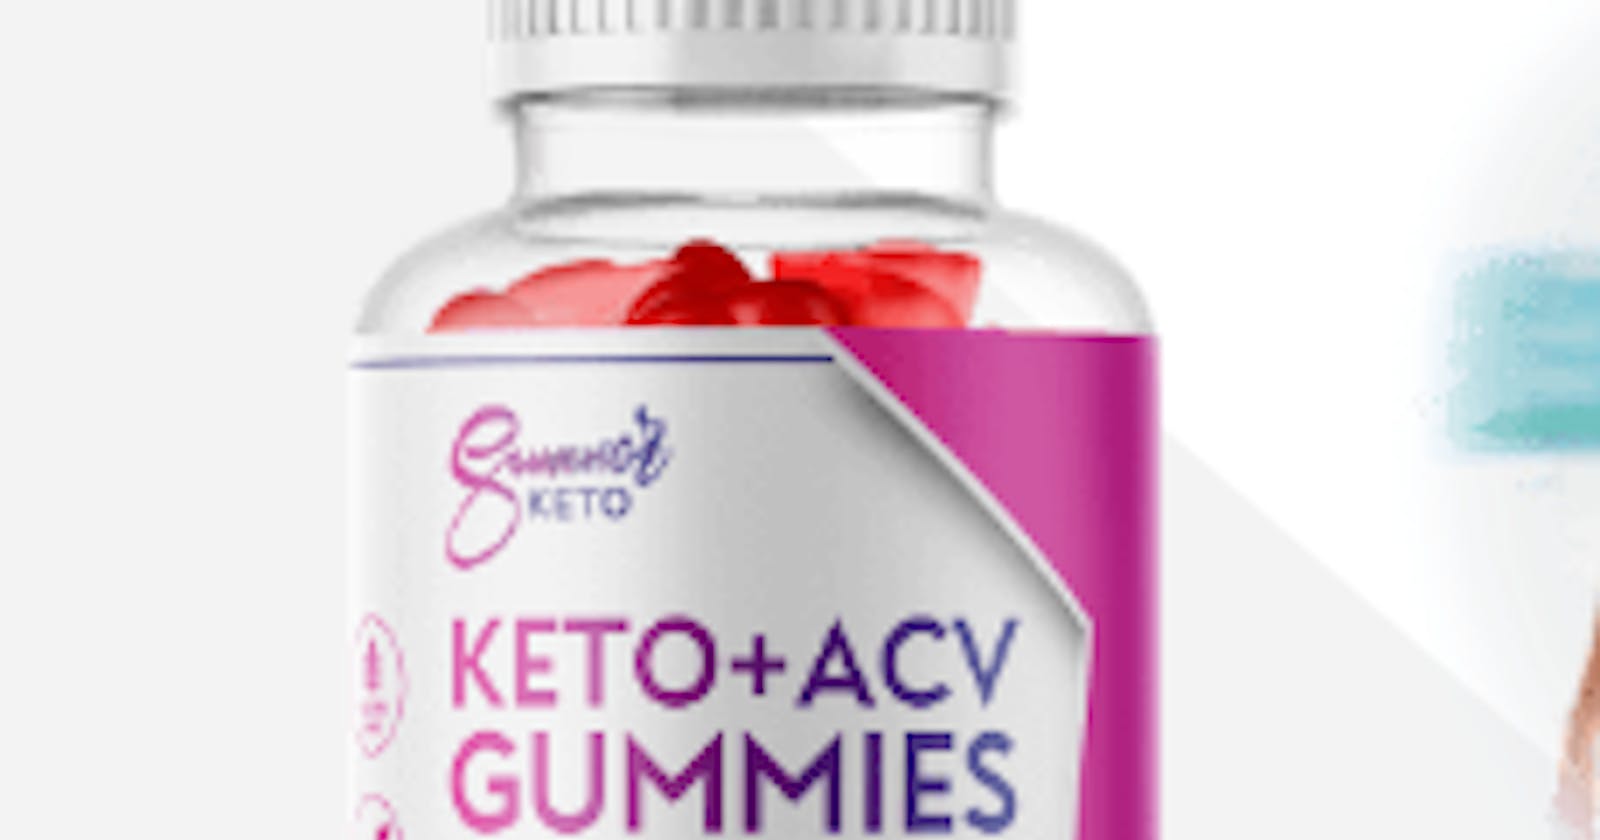 Platinum Keto Acv Gummies Doesn't Have To Be Hard. Read These 9 Tips